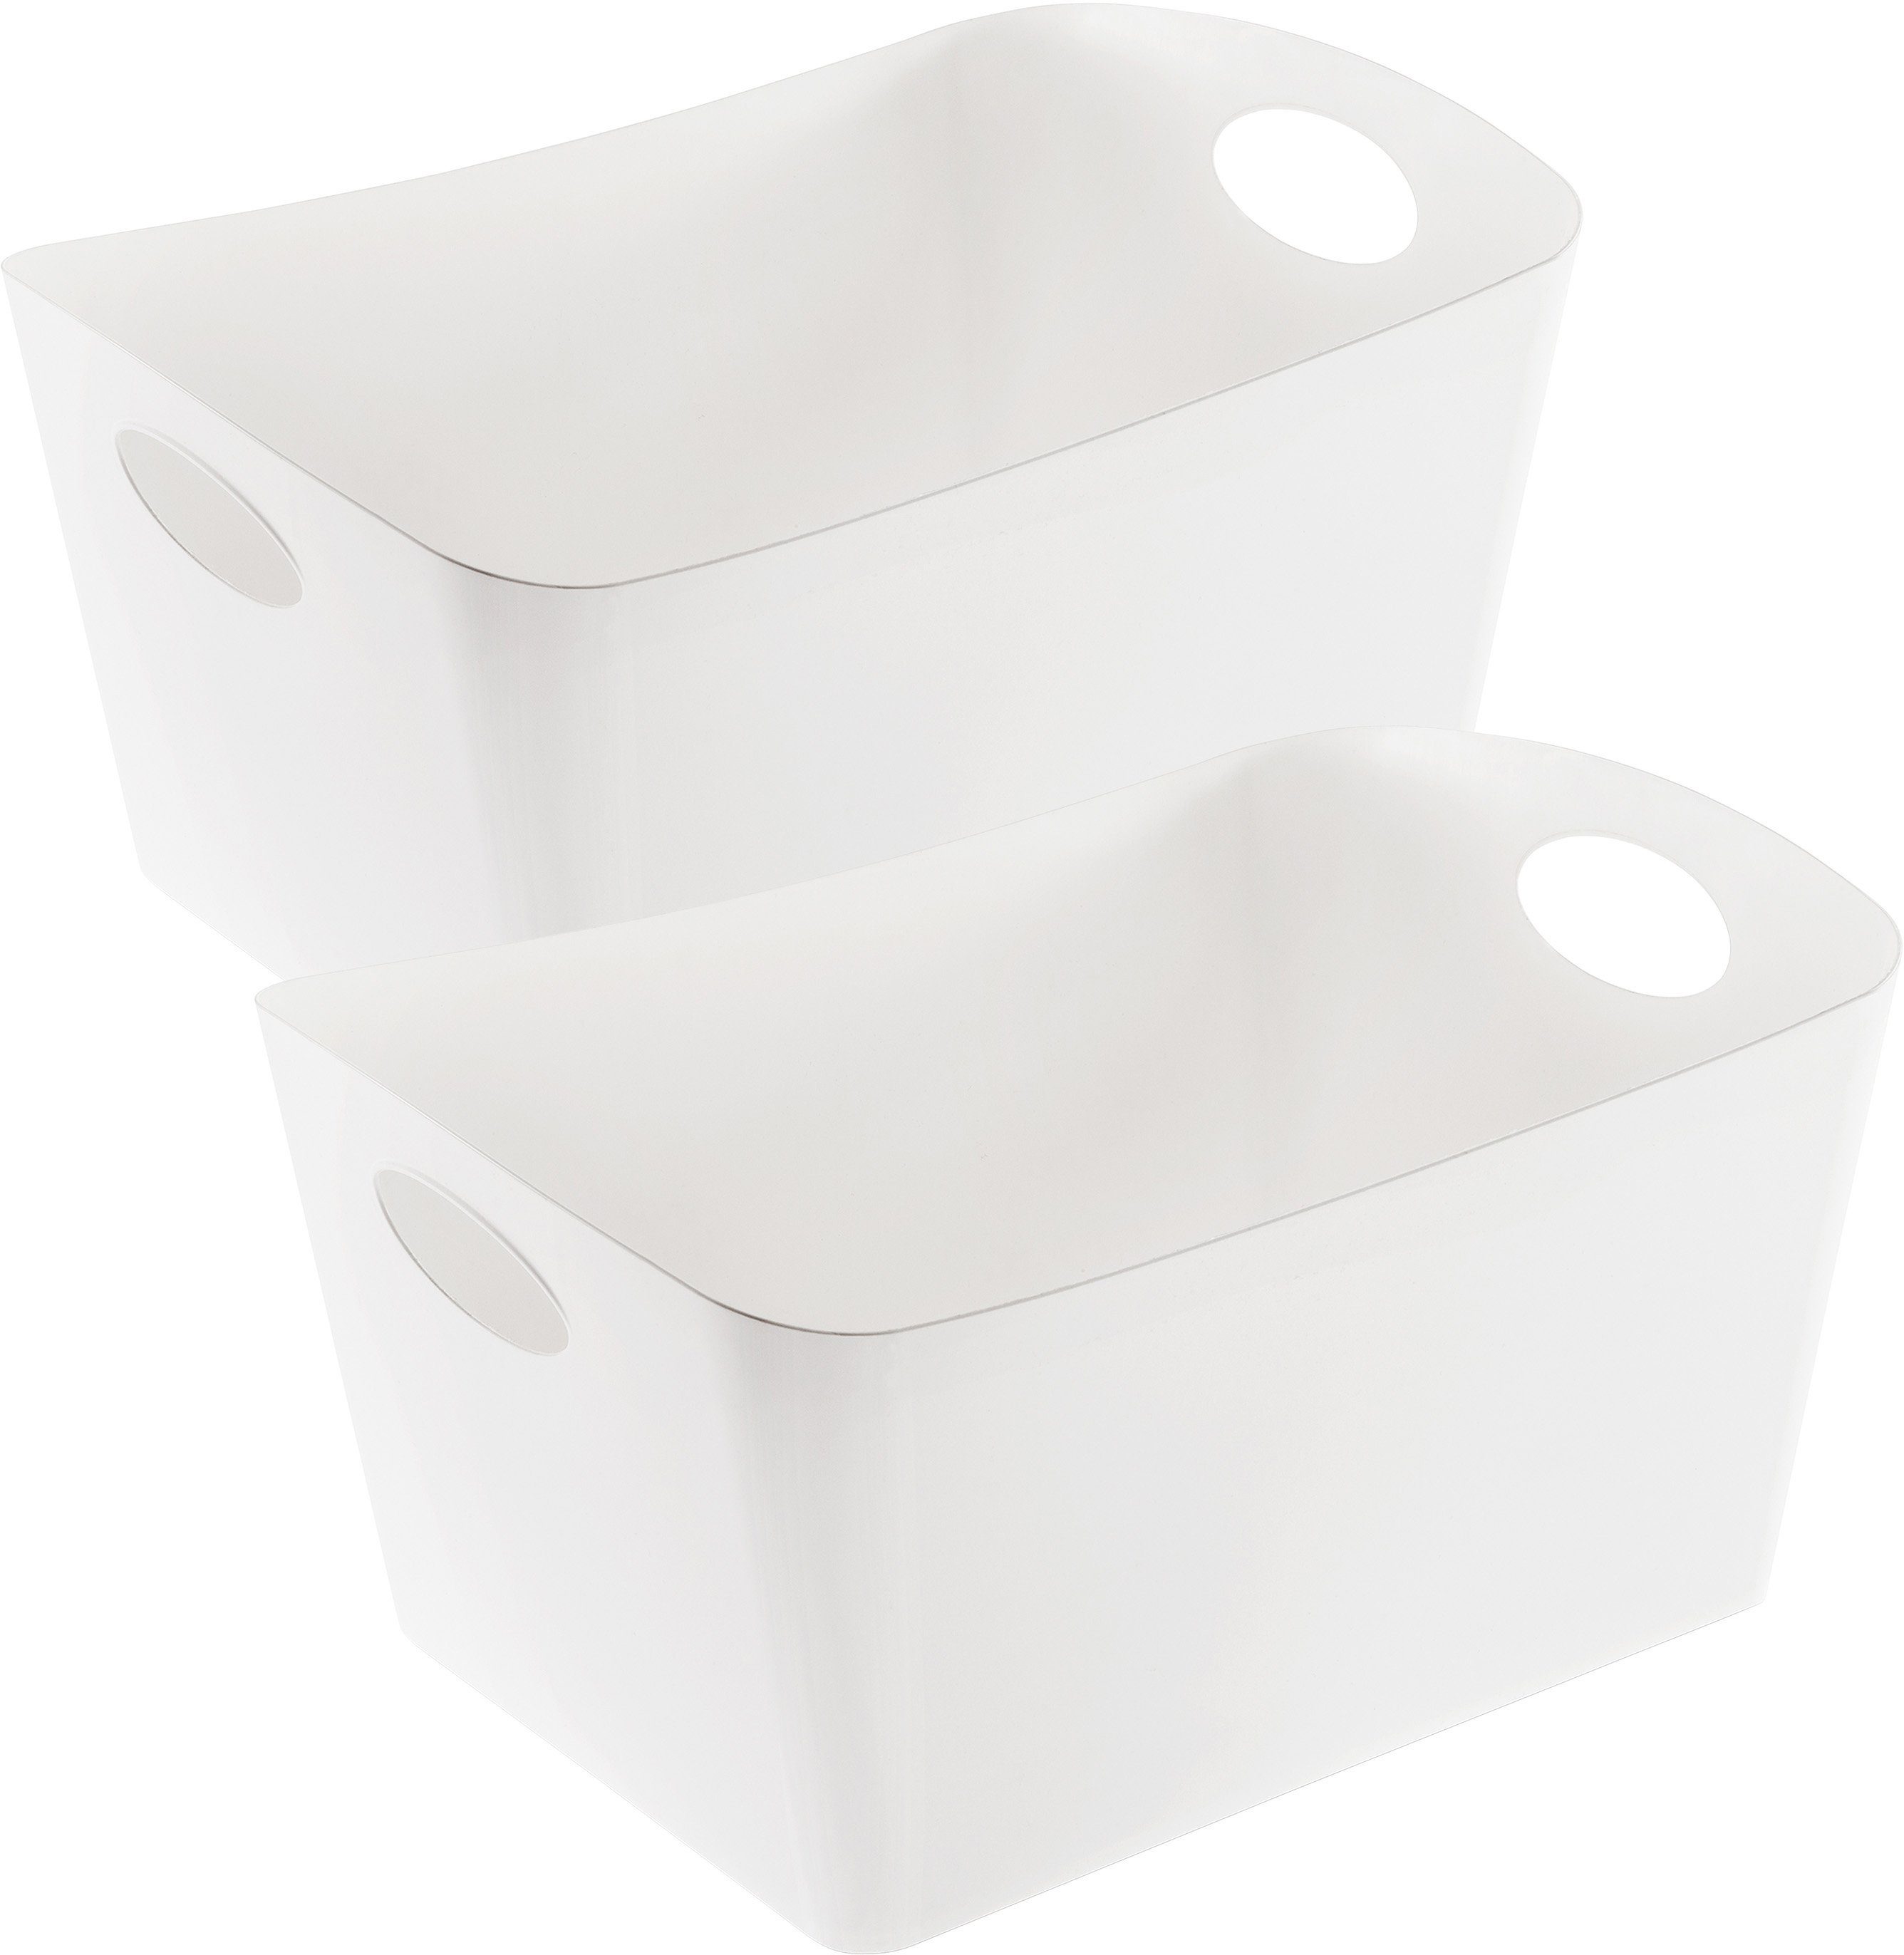 KOZIOL Organizer Aufbewahrungsbox, 15 in St), recycled BOXXX white 100% Liter Germany, 2 Material, Made (Set, recyceltes L